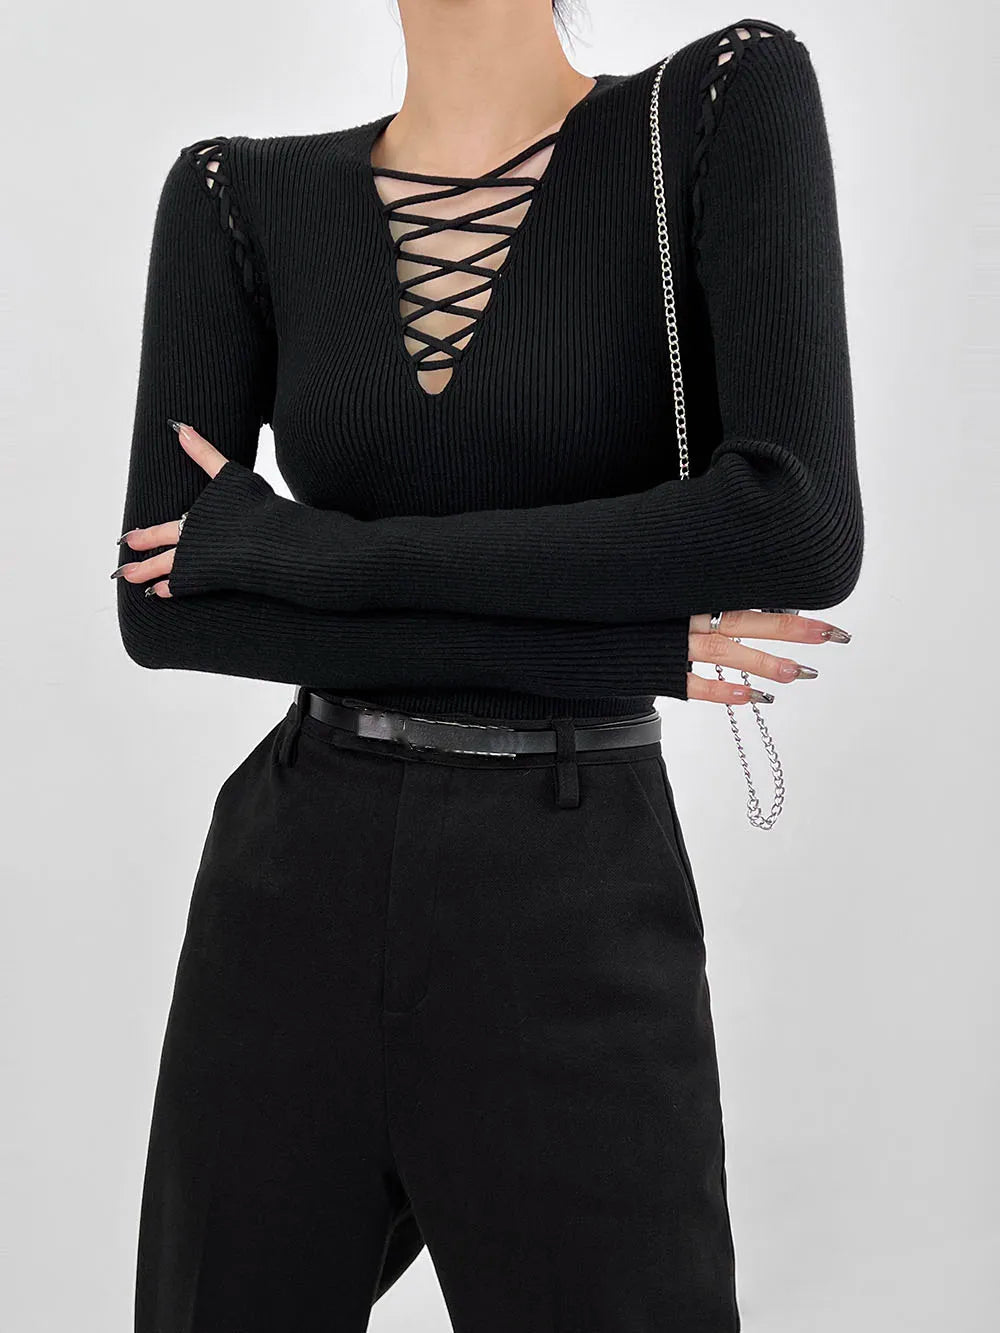 Sexy Lace Up Sweater Deep V Ribbed Knit Pullover Tops Women Black C-058